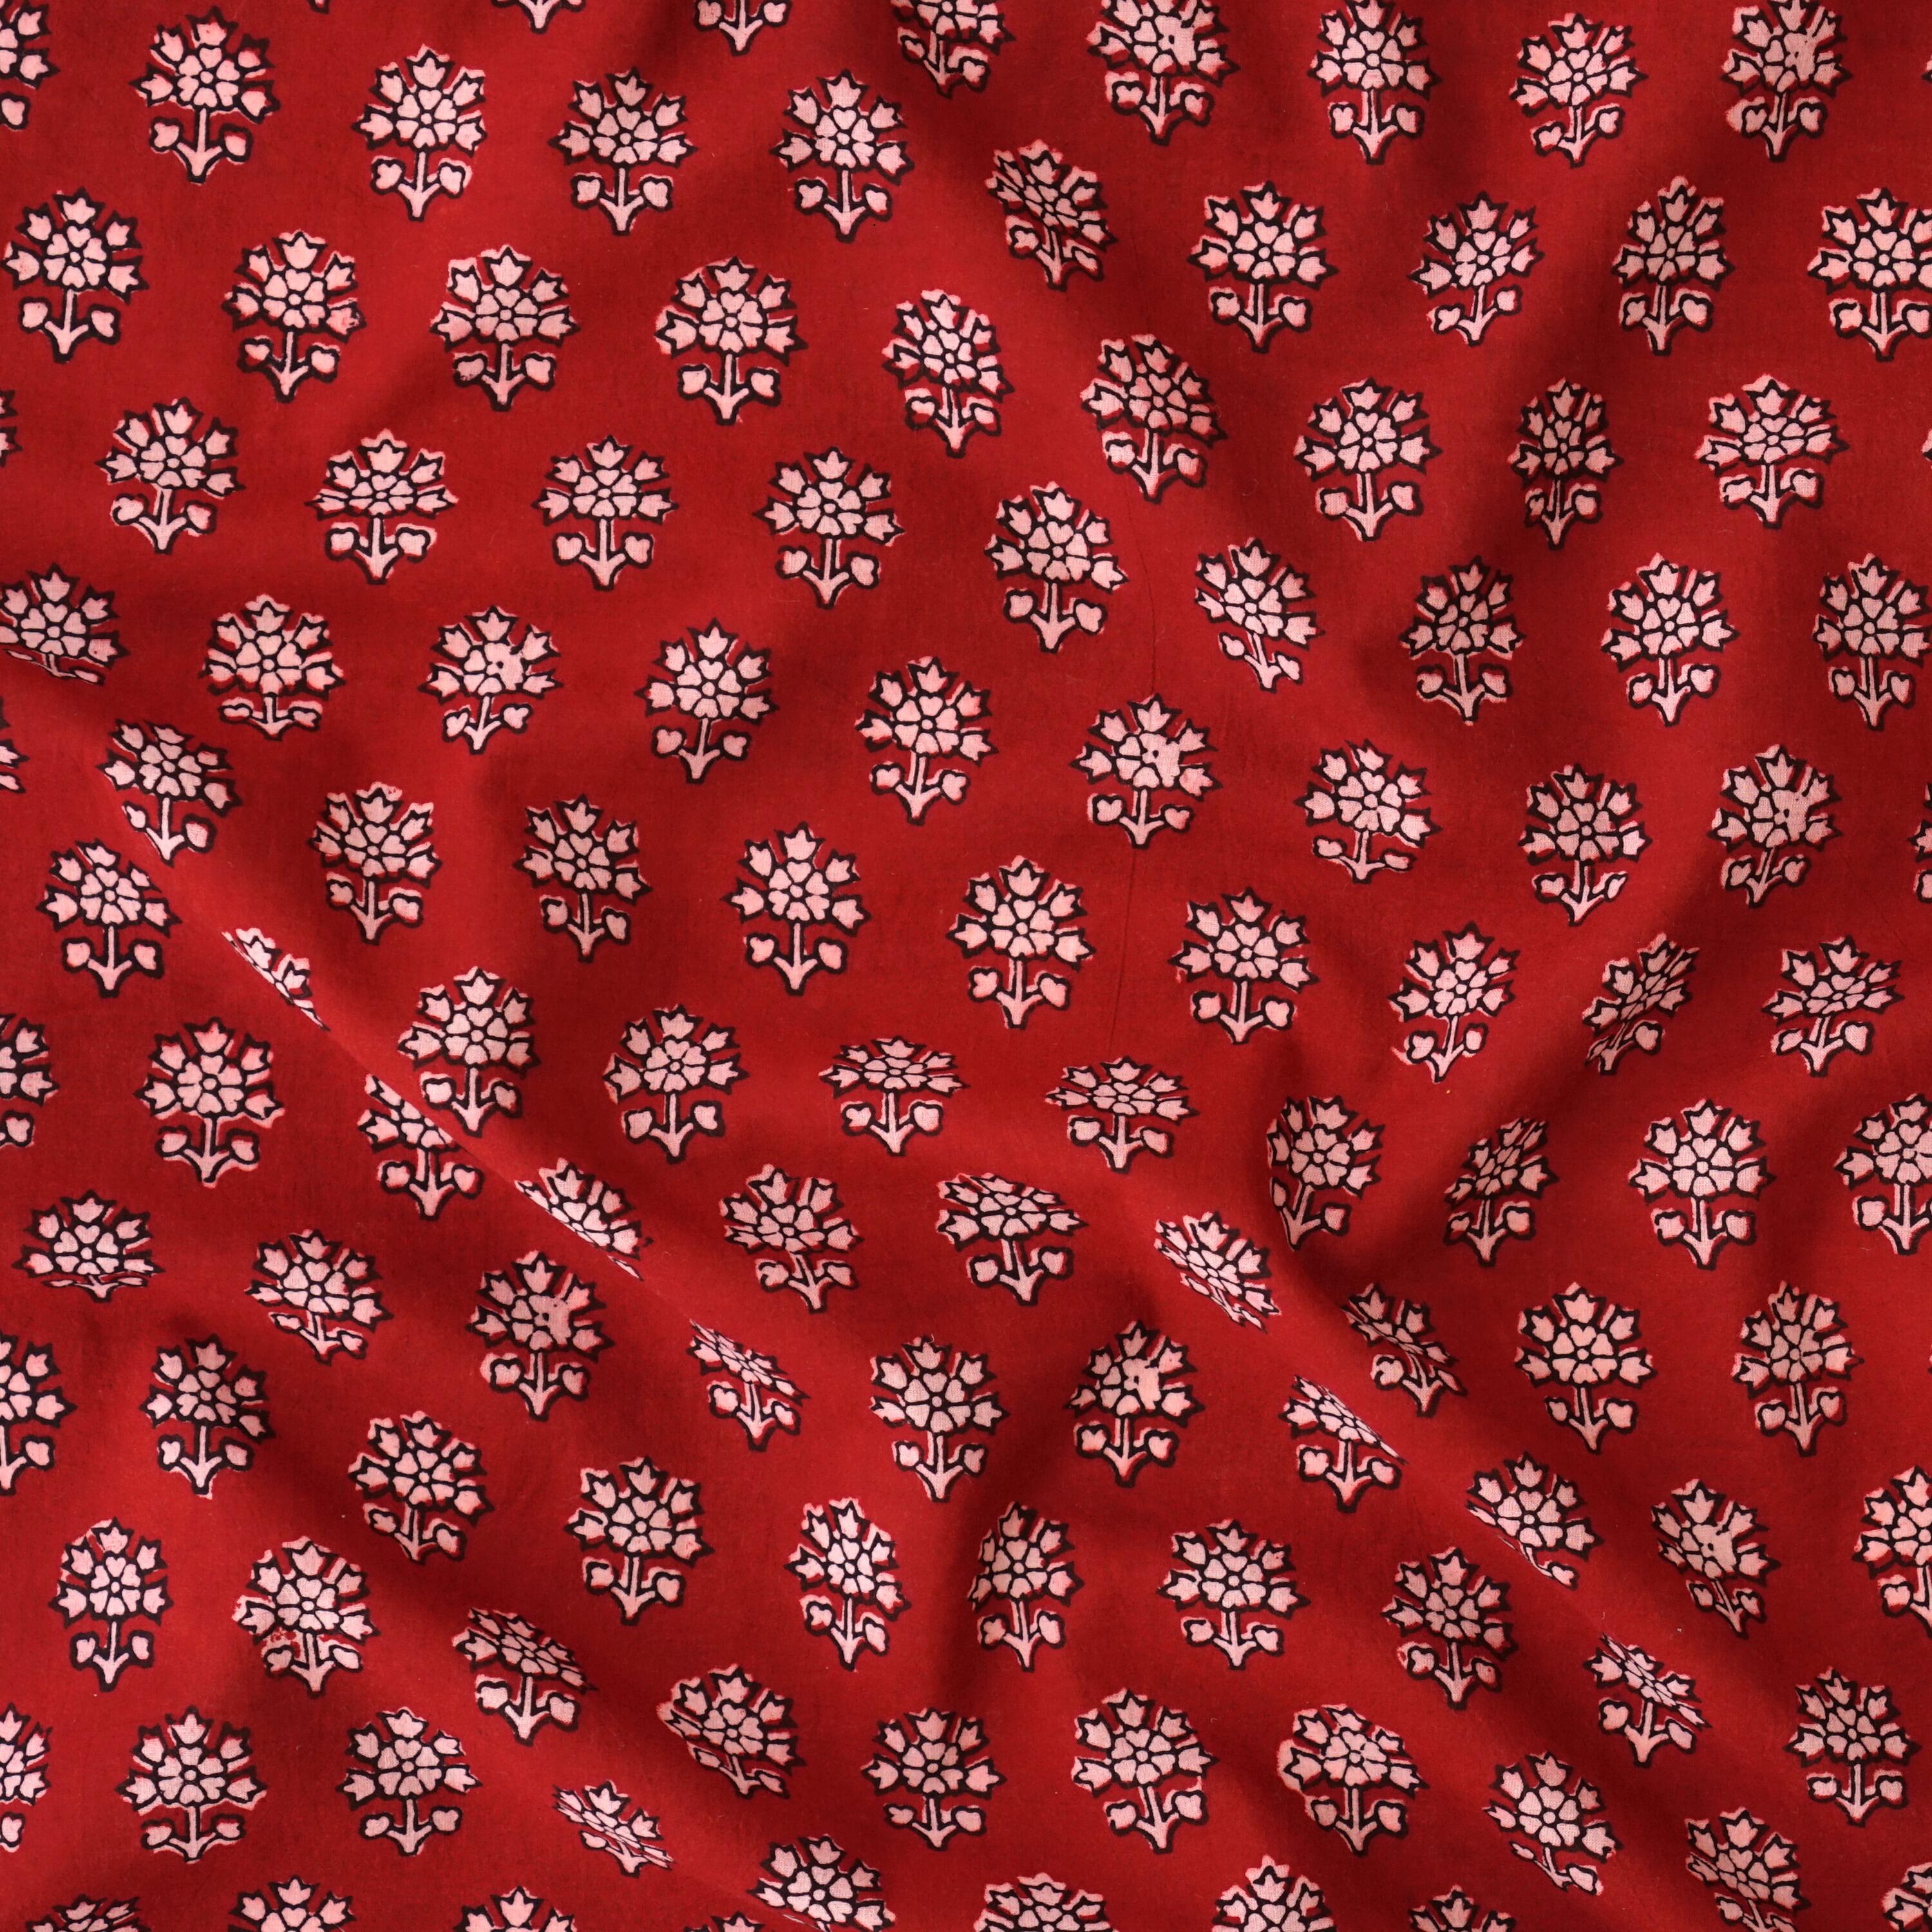 1 - ISK10 - 100% Block-Printed Cotton Fabric From India - New Perspective Design - Iron Rust Black & Alizarin Red Dyes - Contrast